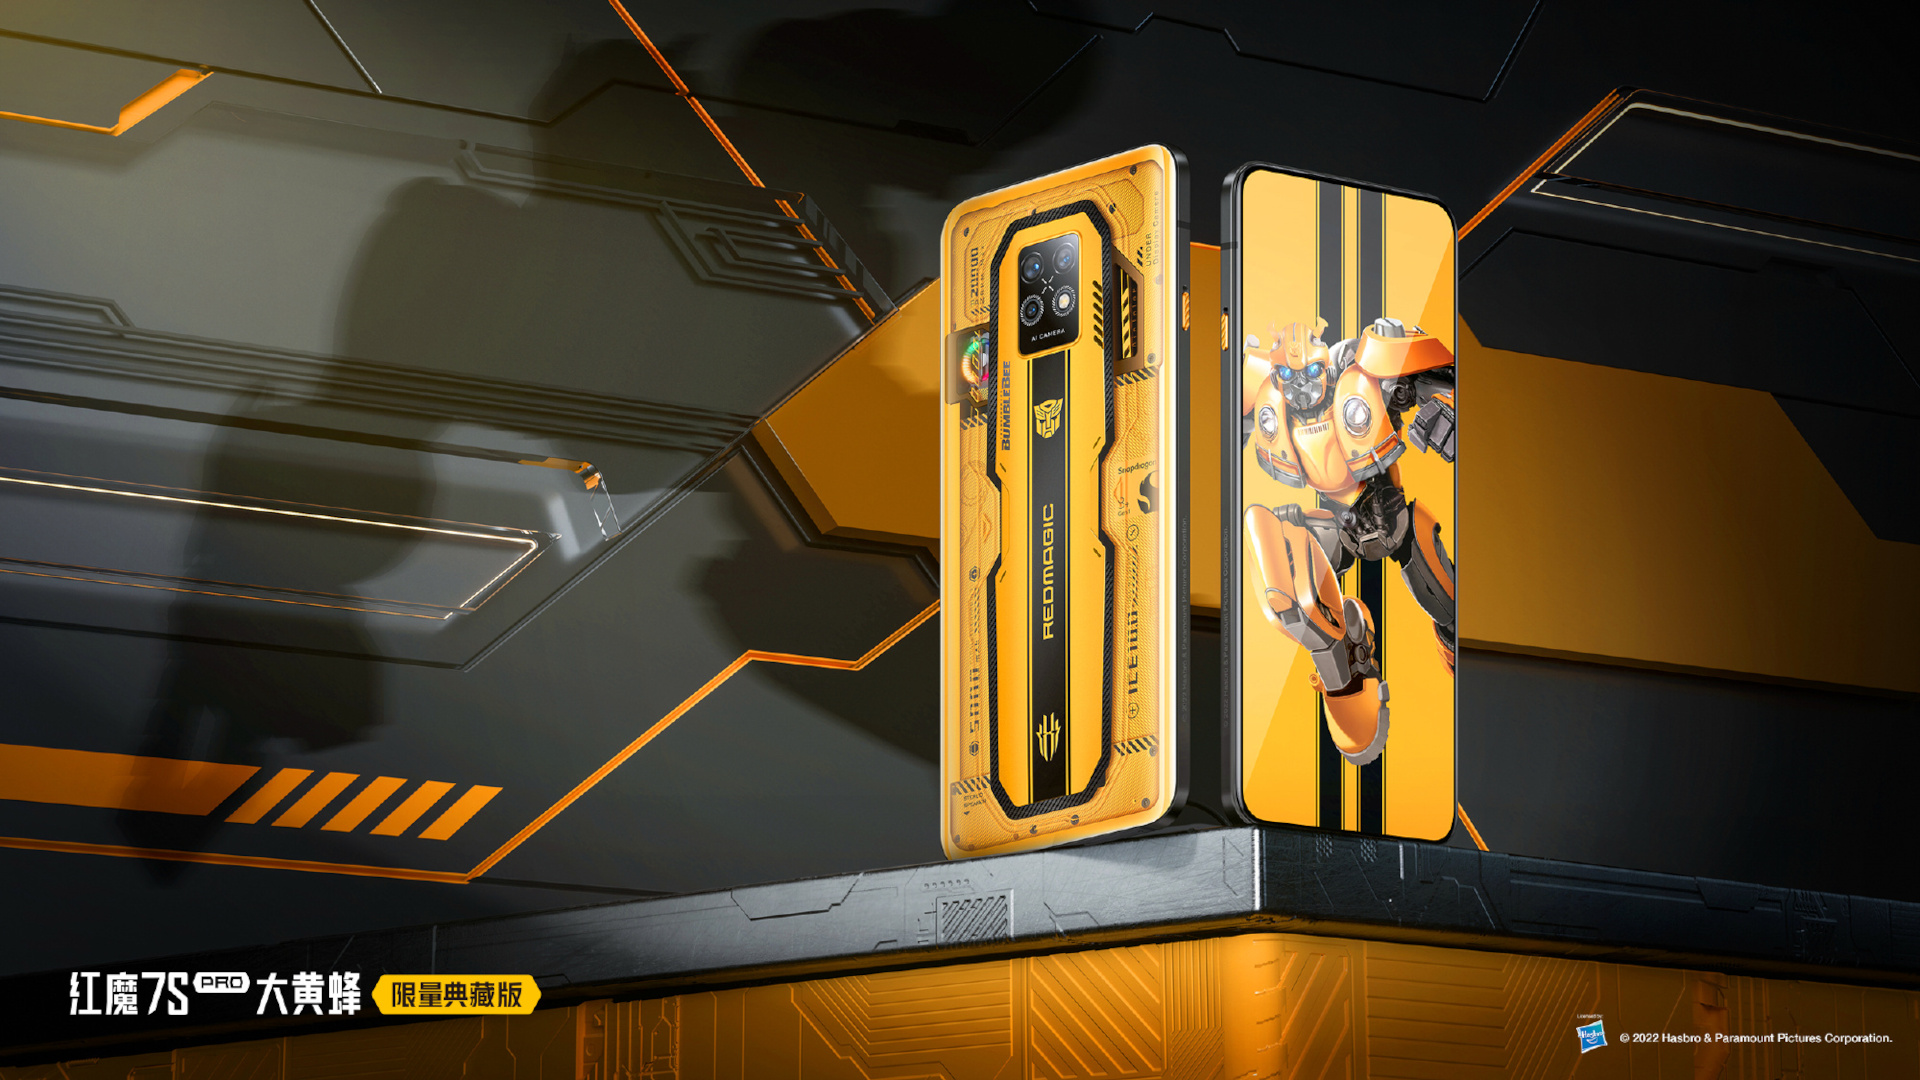 Transformers fan? This Bumblebee Edition phone might be for you.